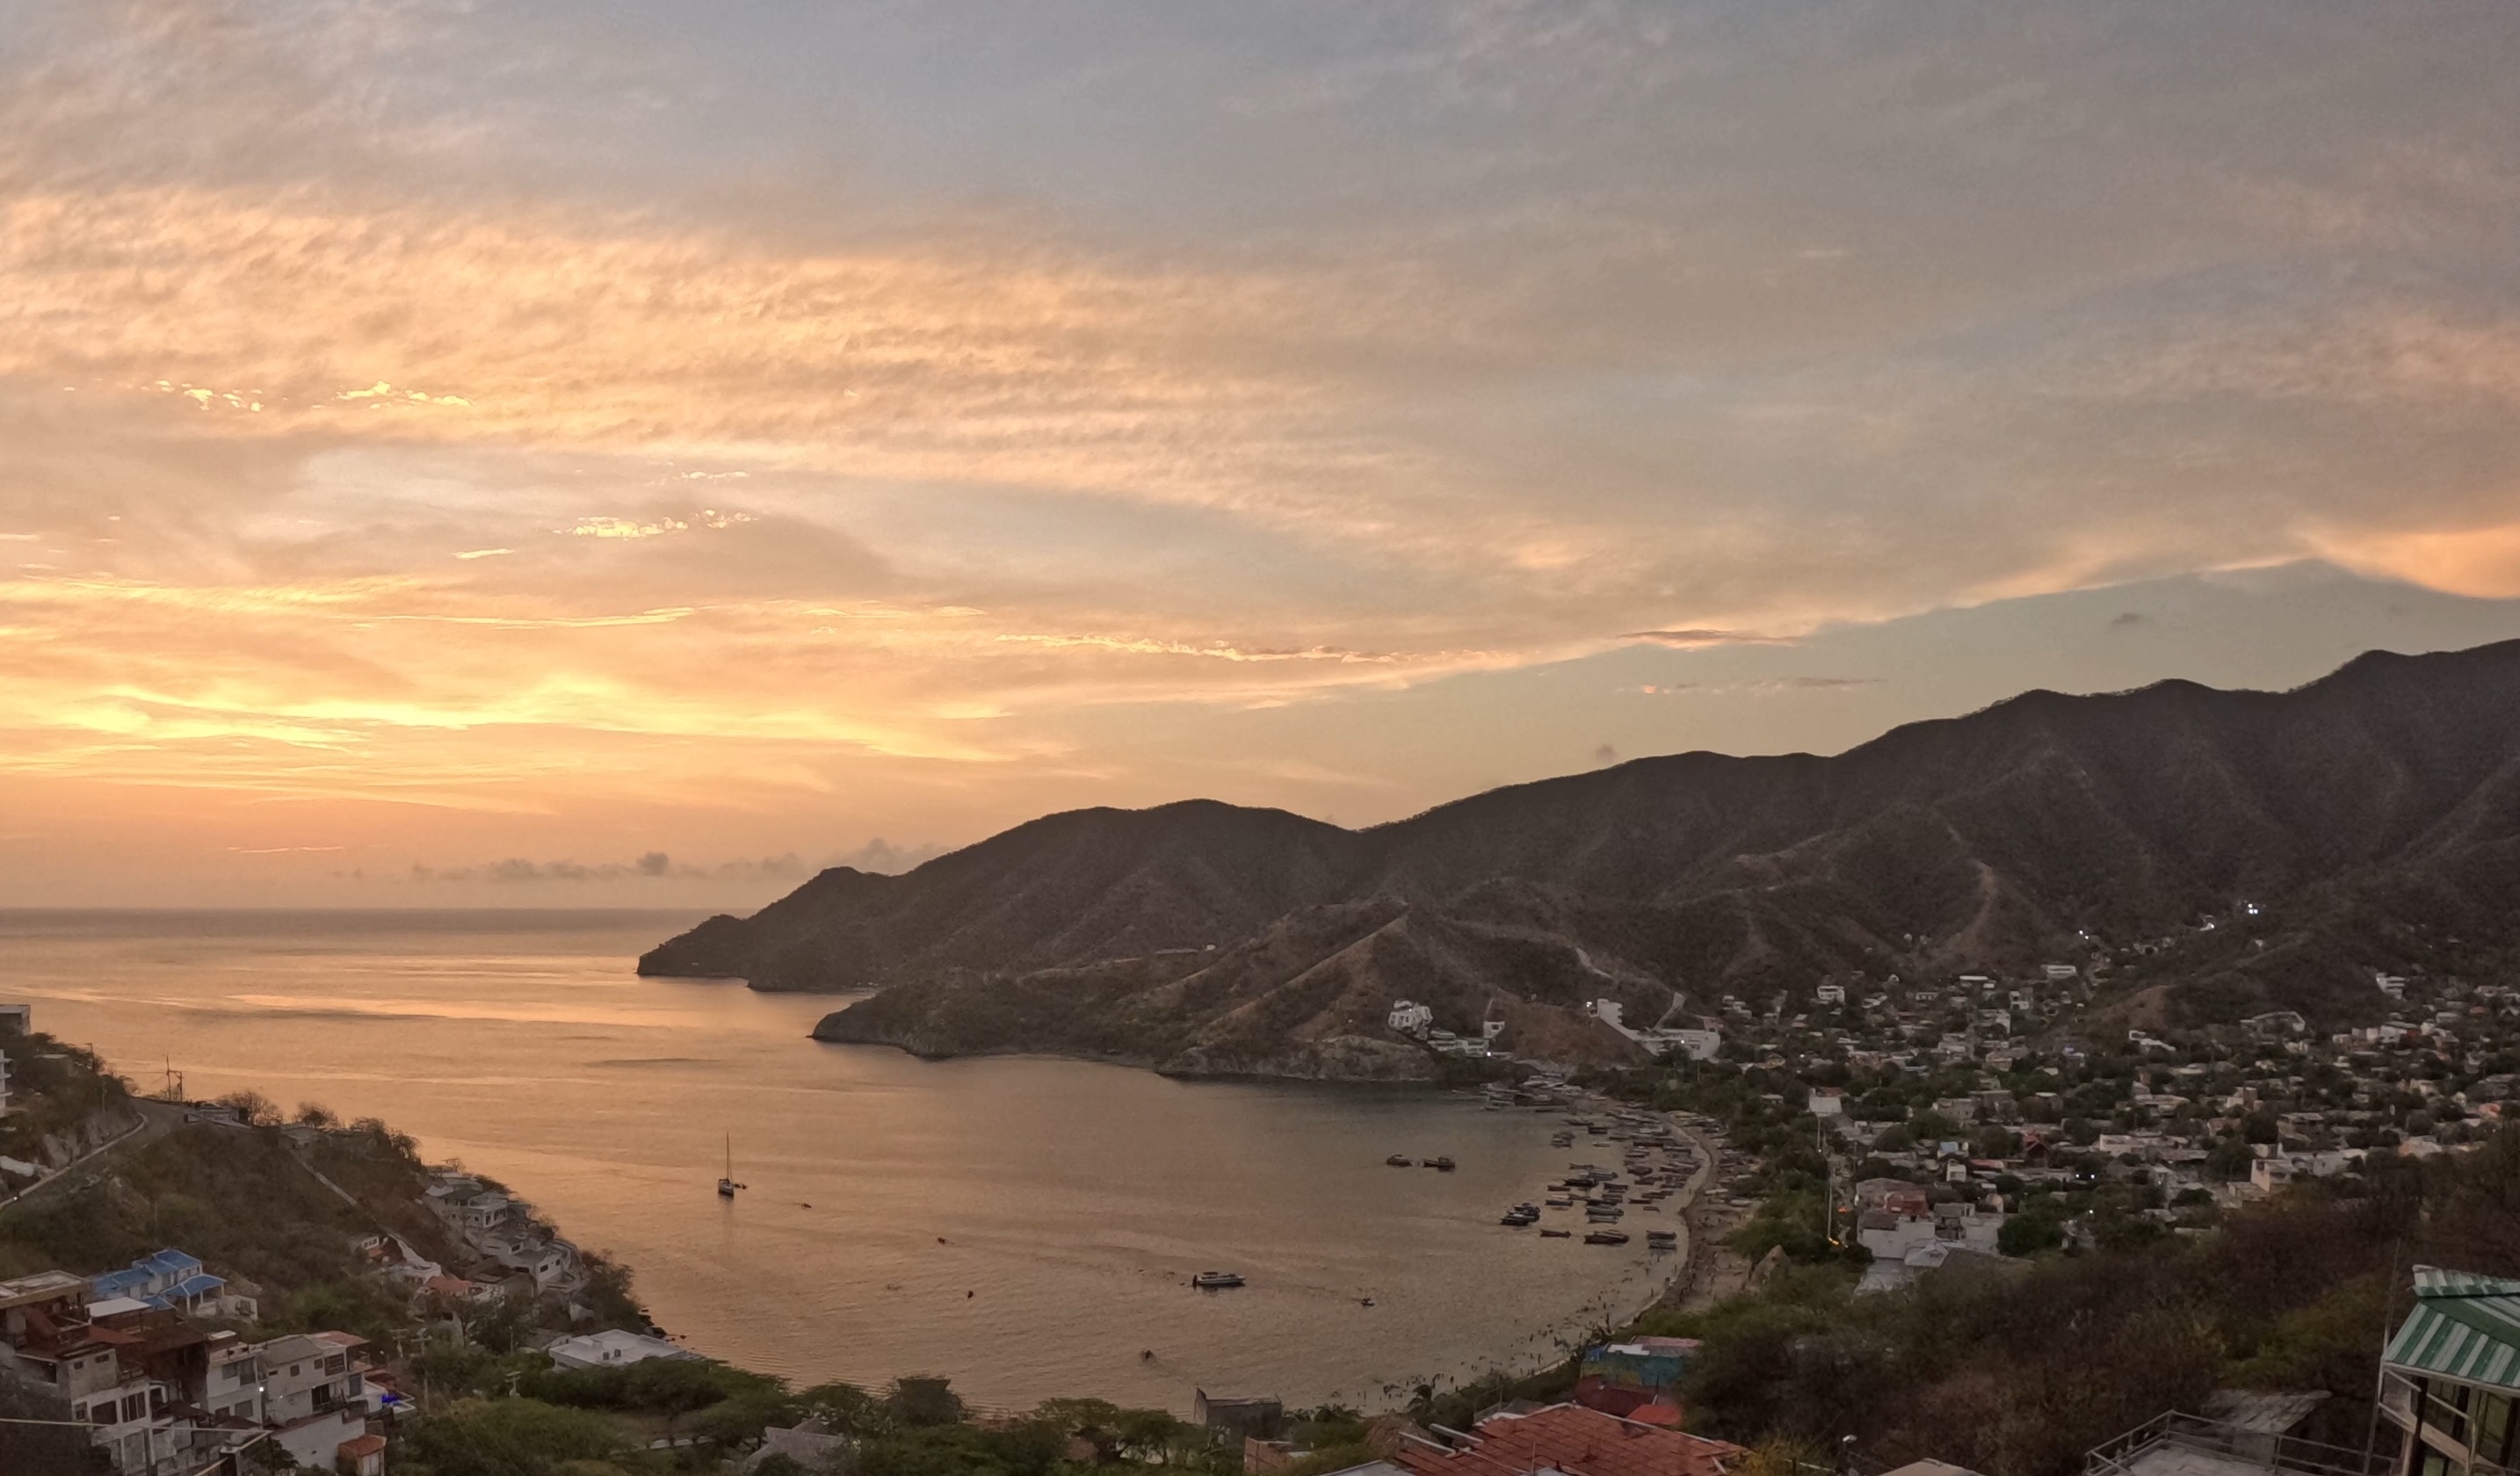 A scenic view of Taganga, Colombia, at sunset, with a golden sky, coastal mountains, and boats dotting the bay, surrounded by hillside houses.